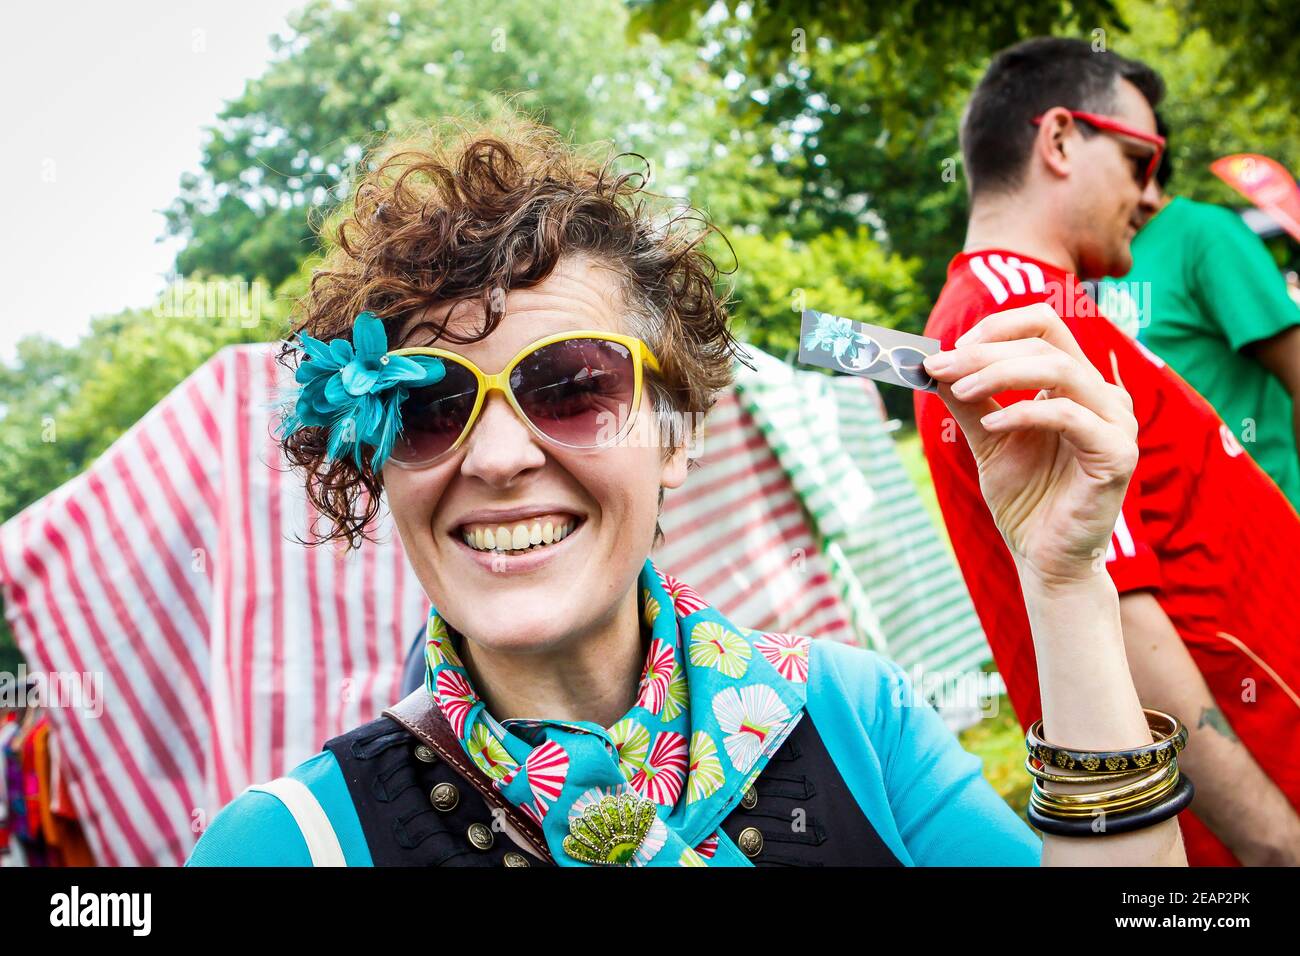 Smiley lady with fun blue flower sunglasses Underground Festival in Crystal Palace,South London Stock Photo